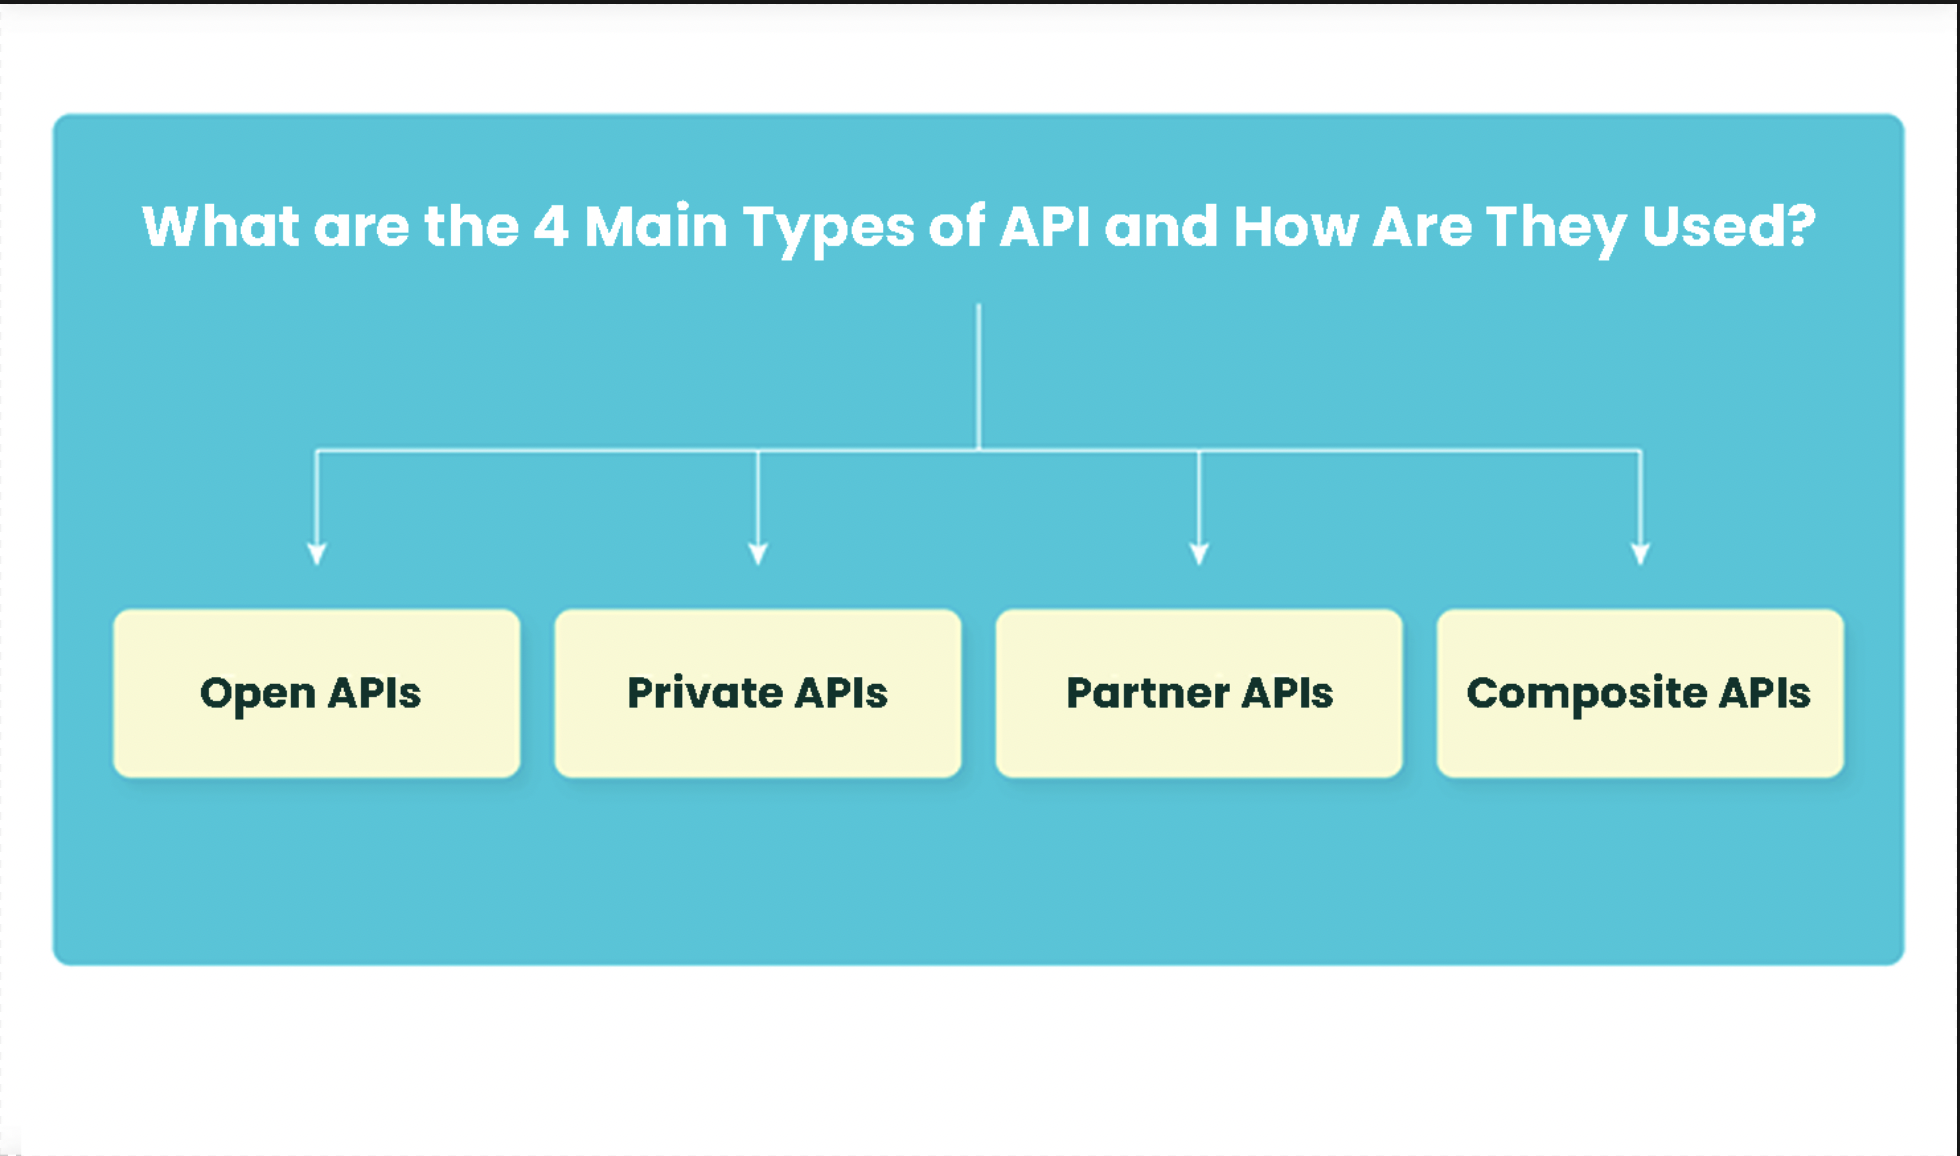 What are the 4 Main Types of API and How Are They Used?